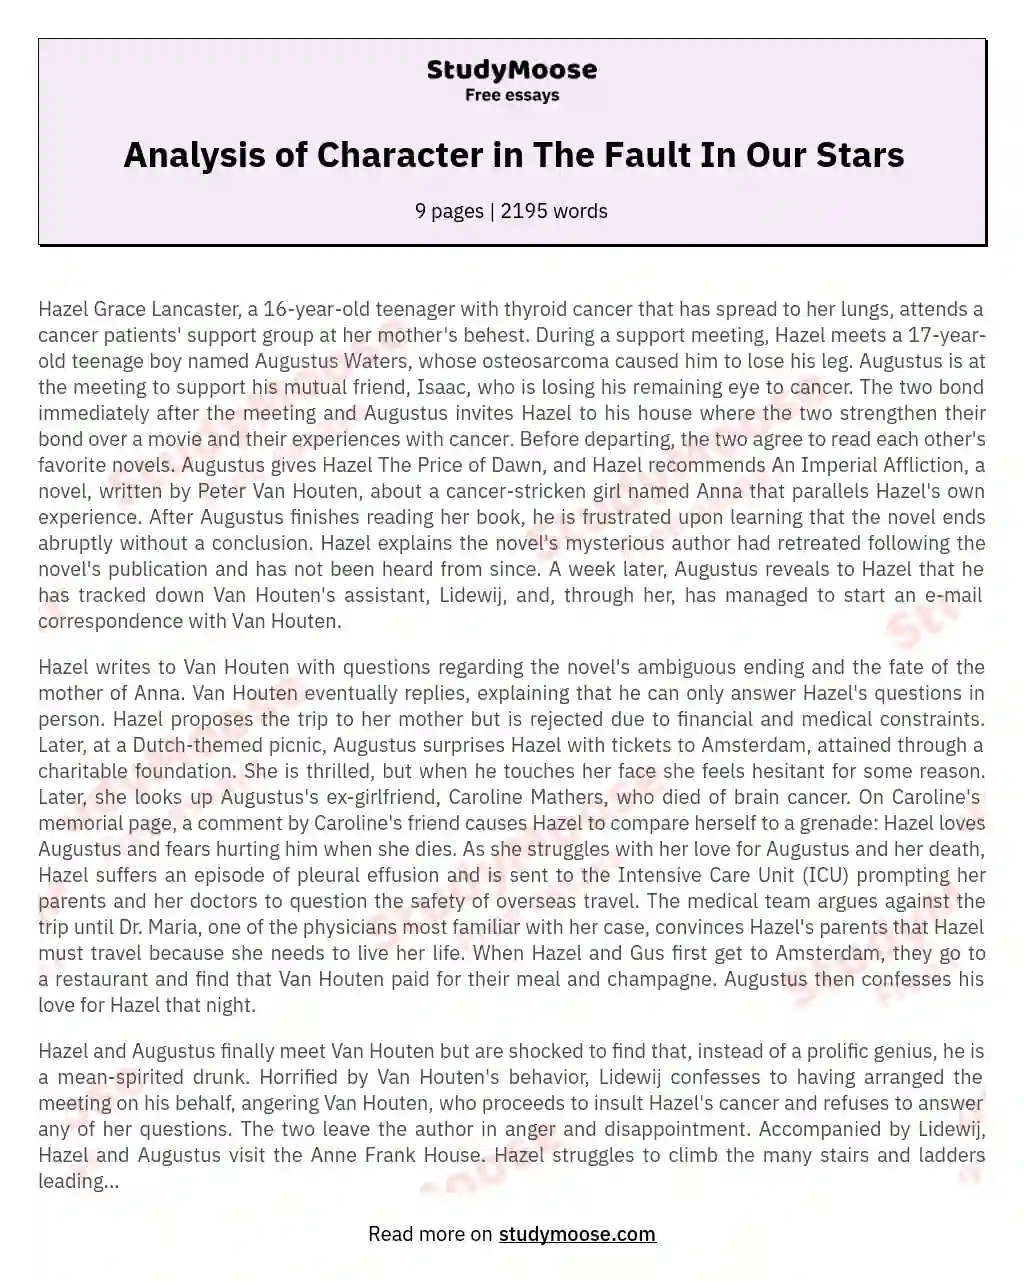 Analysis of Character in The Fault In Our Stars essay